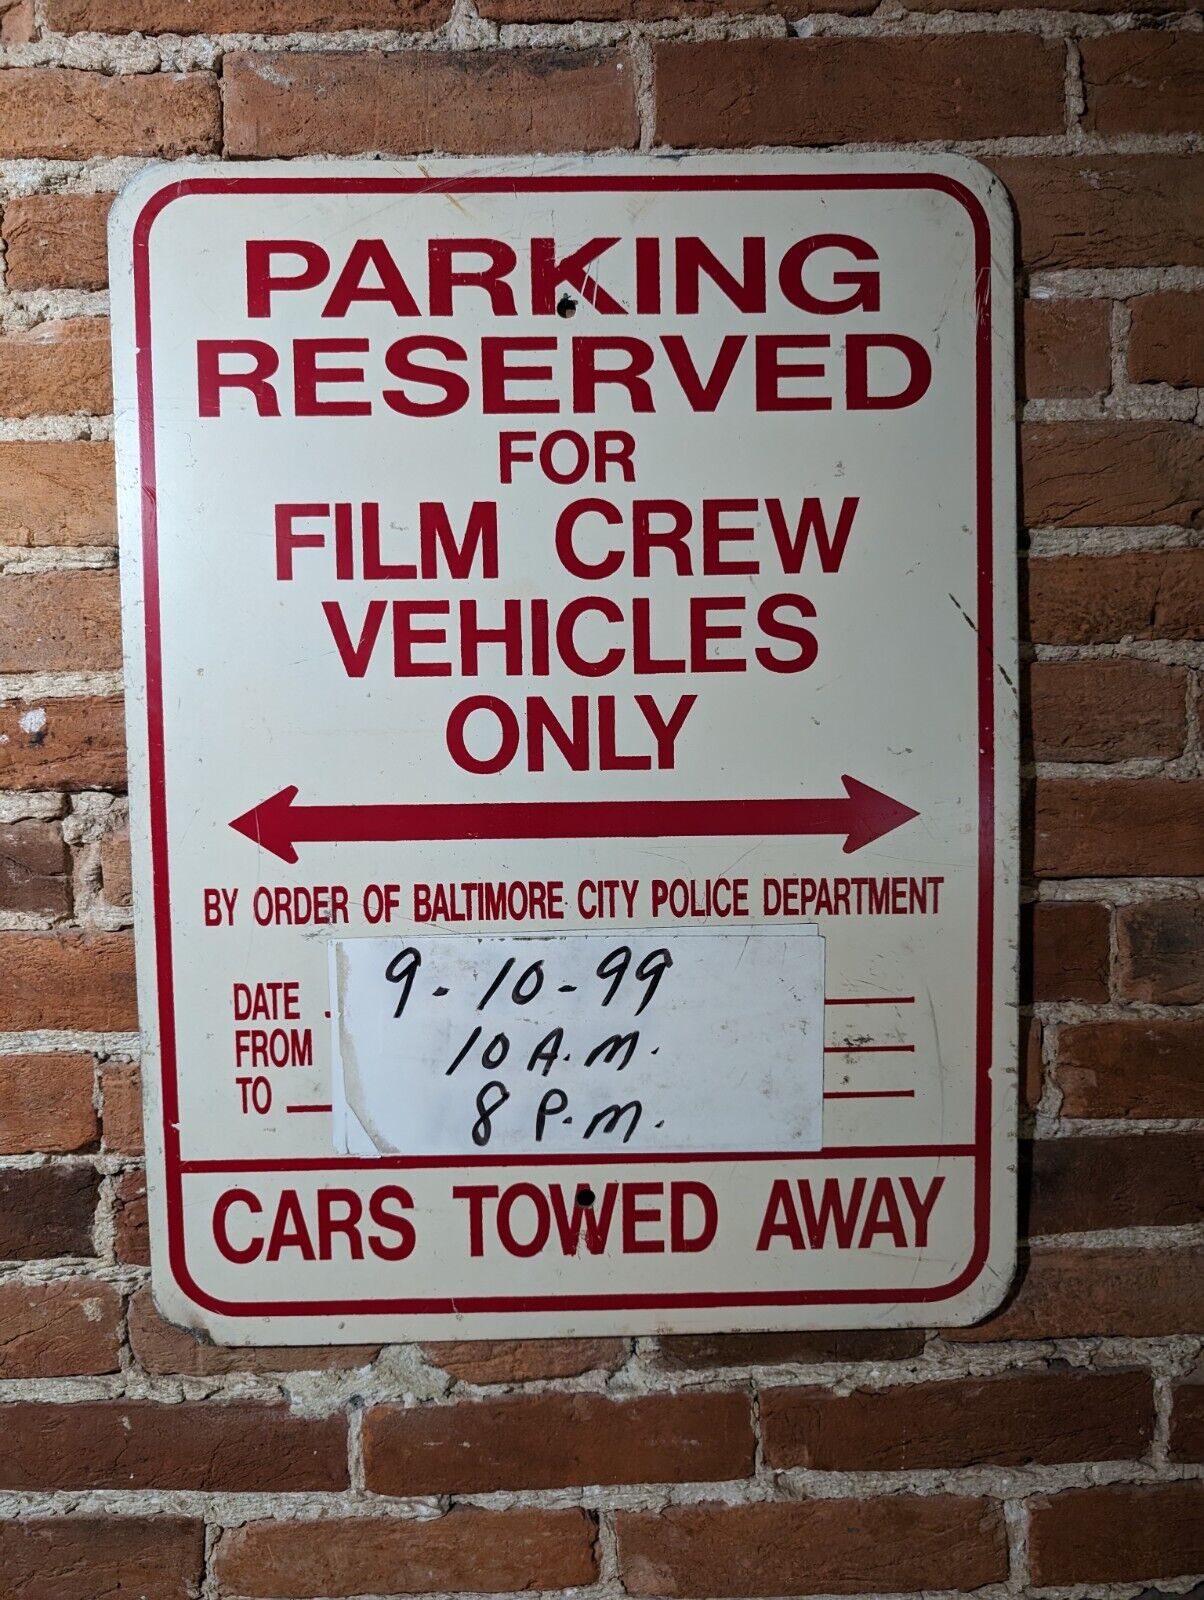 ** VINTAGE PARKING RESERVED FOR FILM CREW VEHICLES SIGN BALTIMORE CITY POLICE **